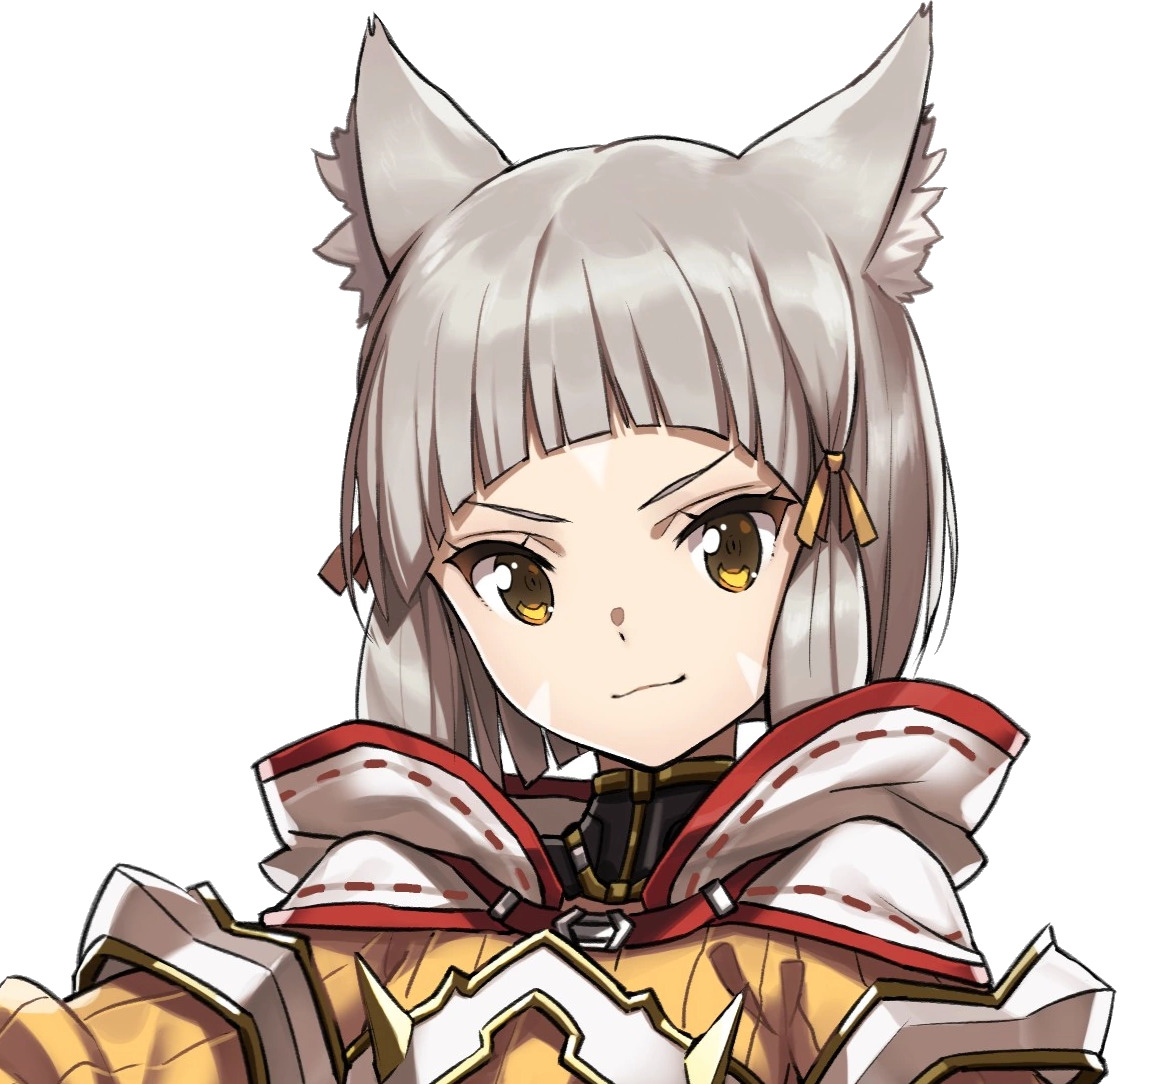 Xenoblade Chronicles 3: How to Get Nia